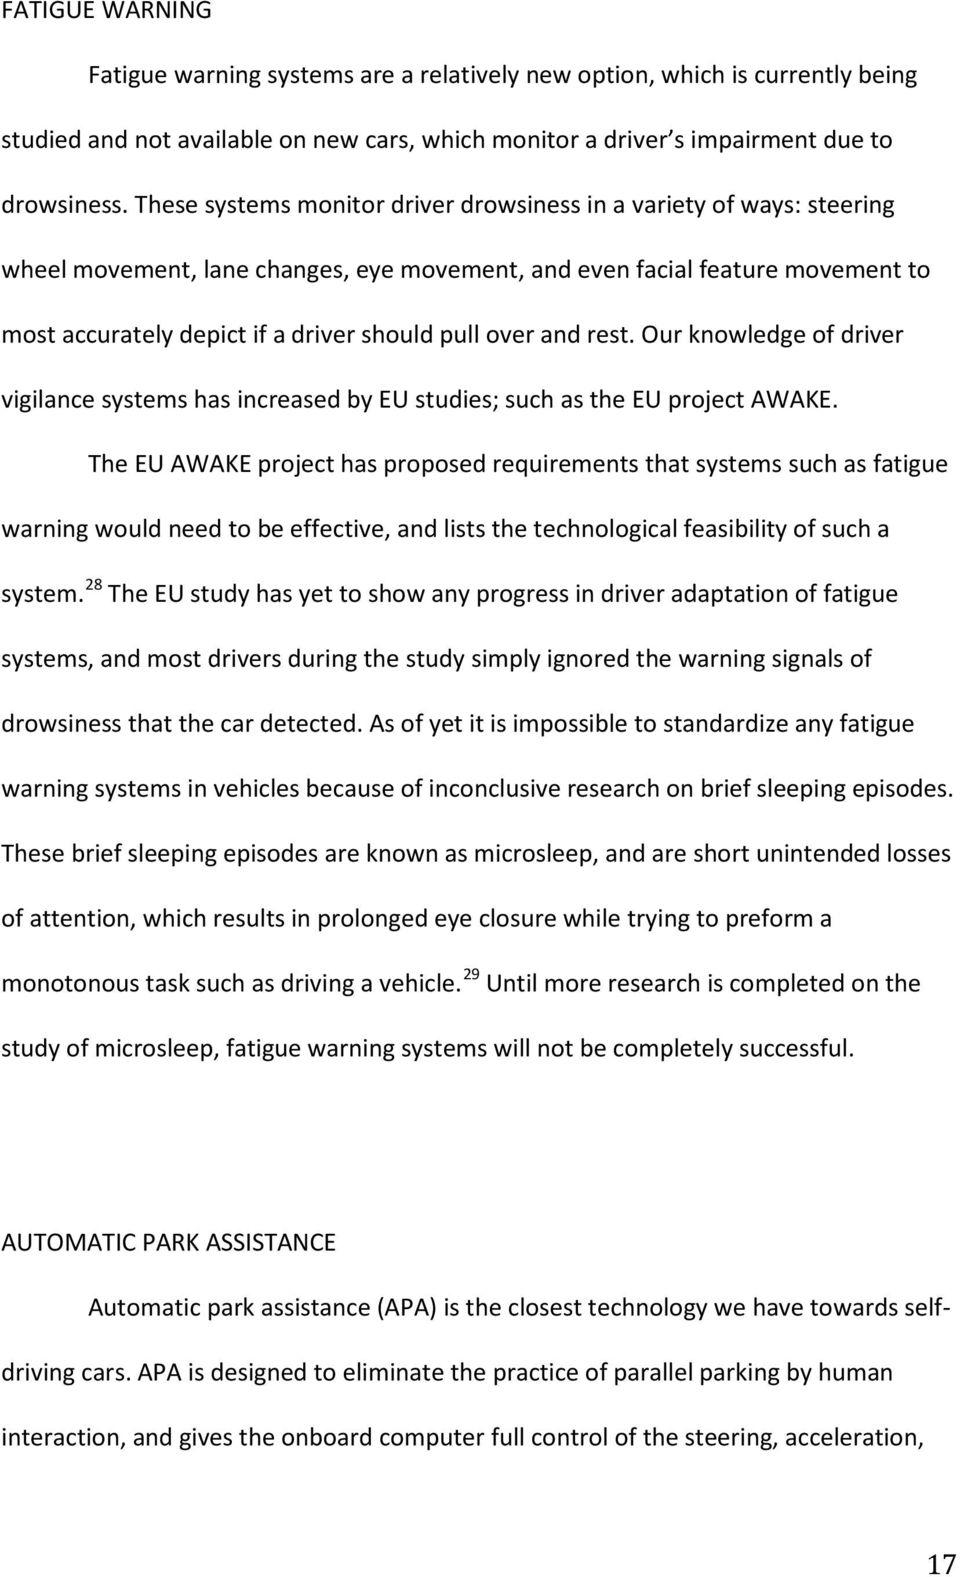 over and rest. Our knowledge of driver vigilance systems has increased by EU studies; such as the EU project AWAKE.